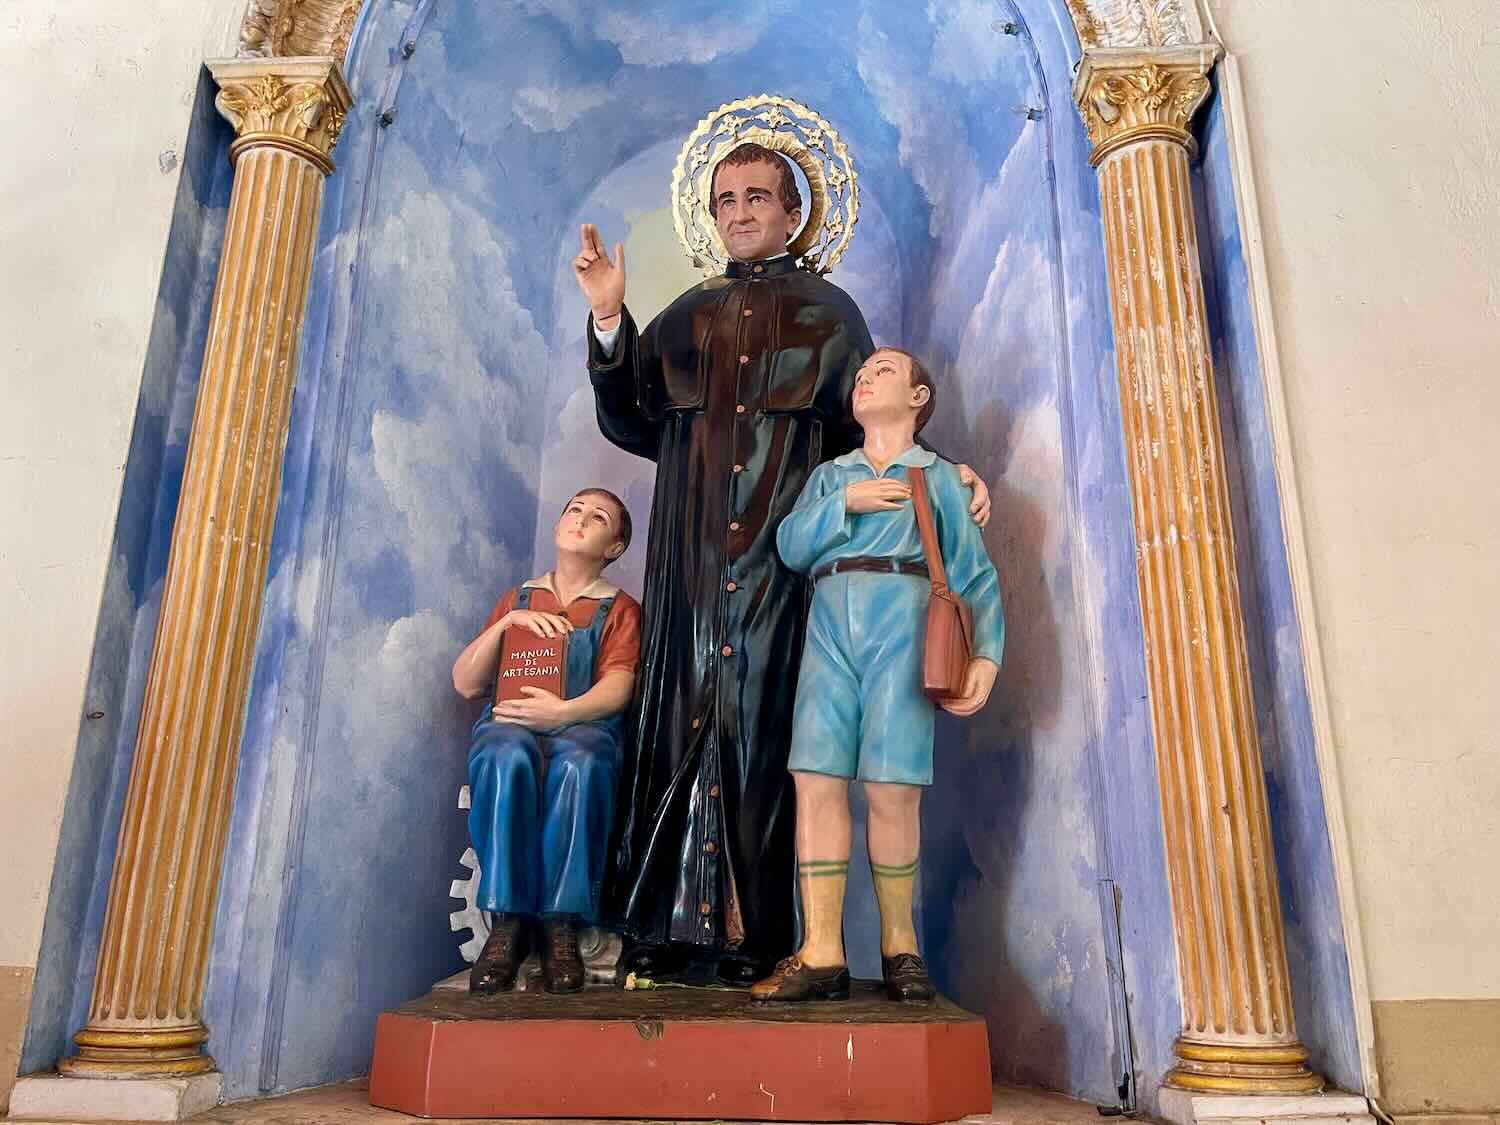 A statue of San Juan Bosco, who devoted his life to educating underprivileged children